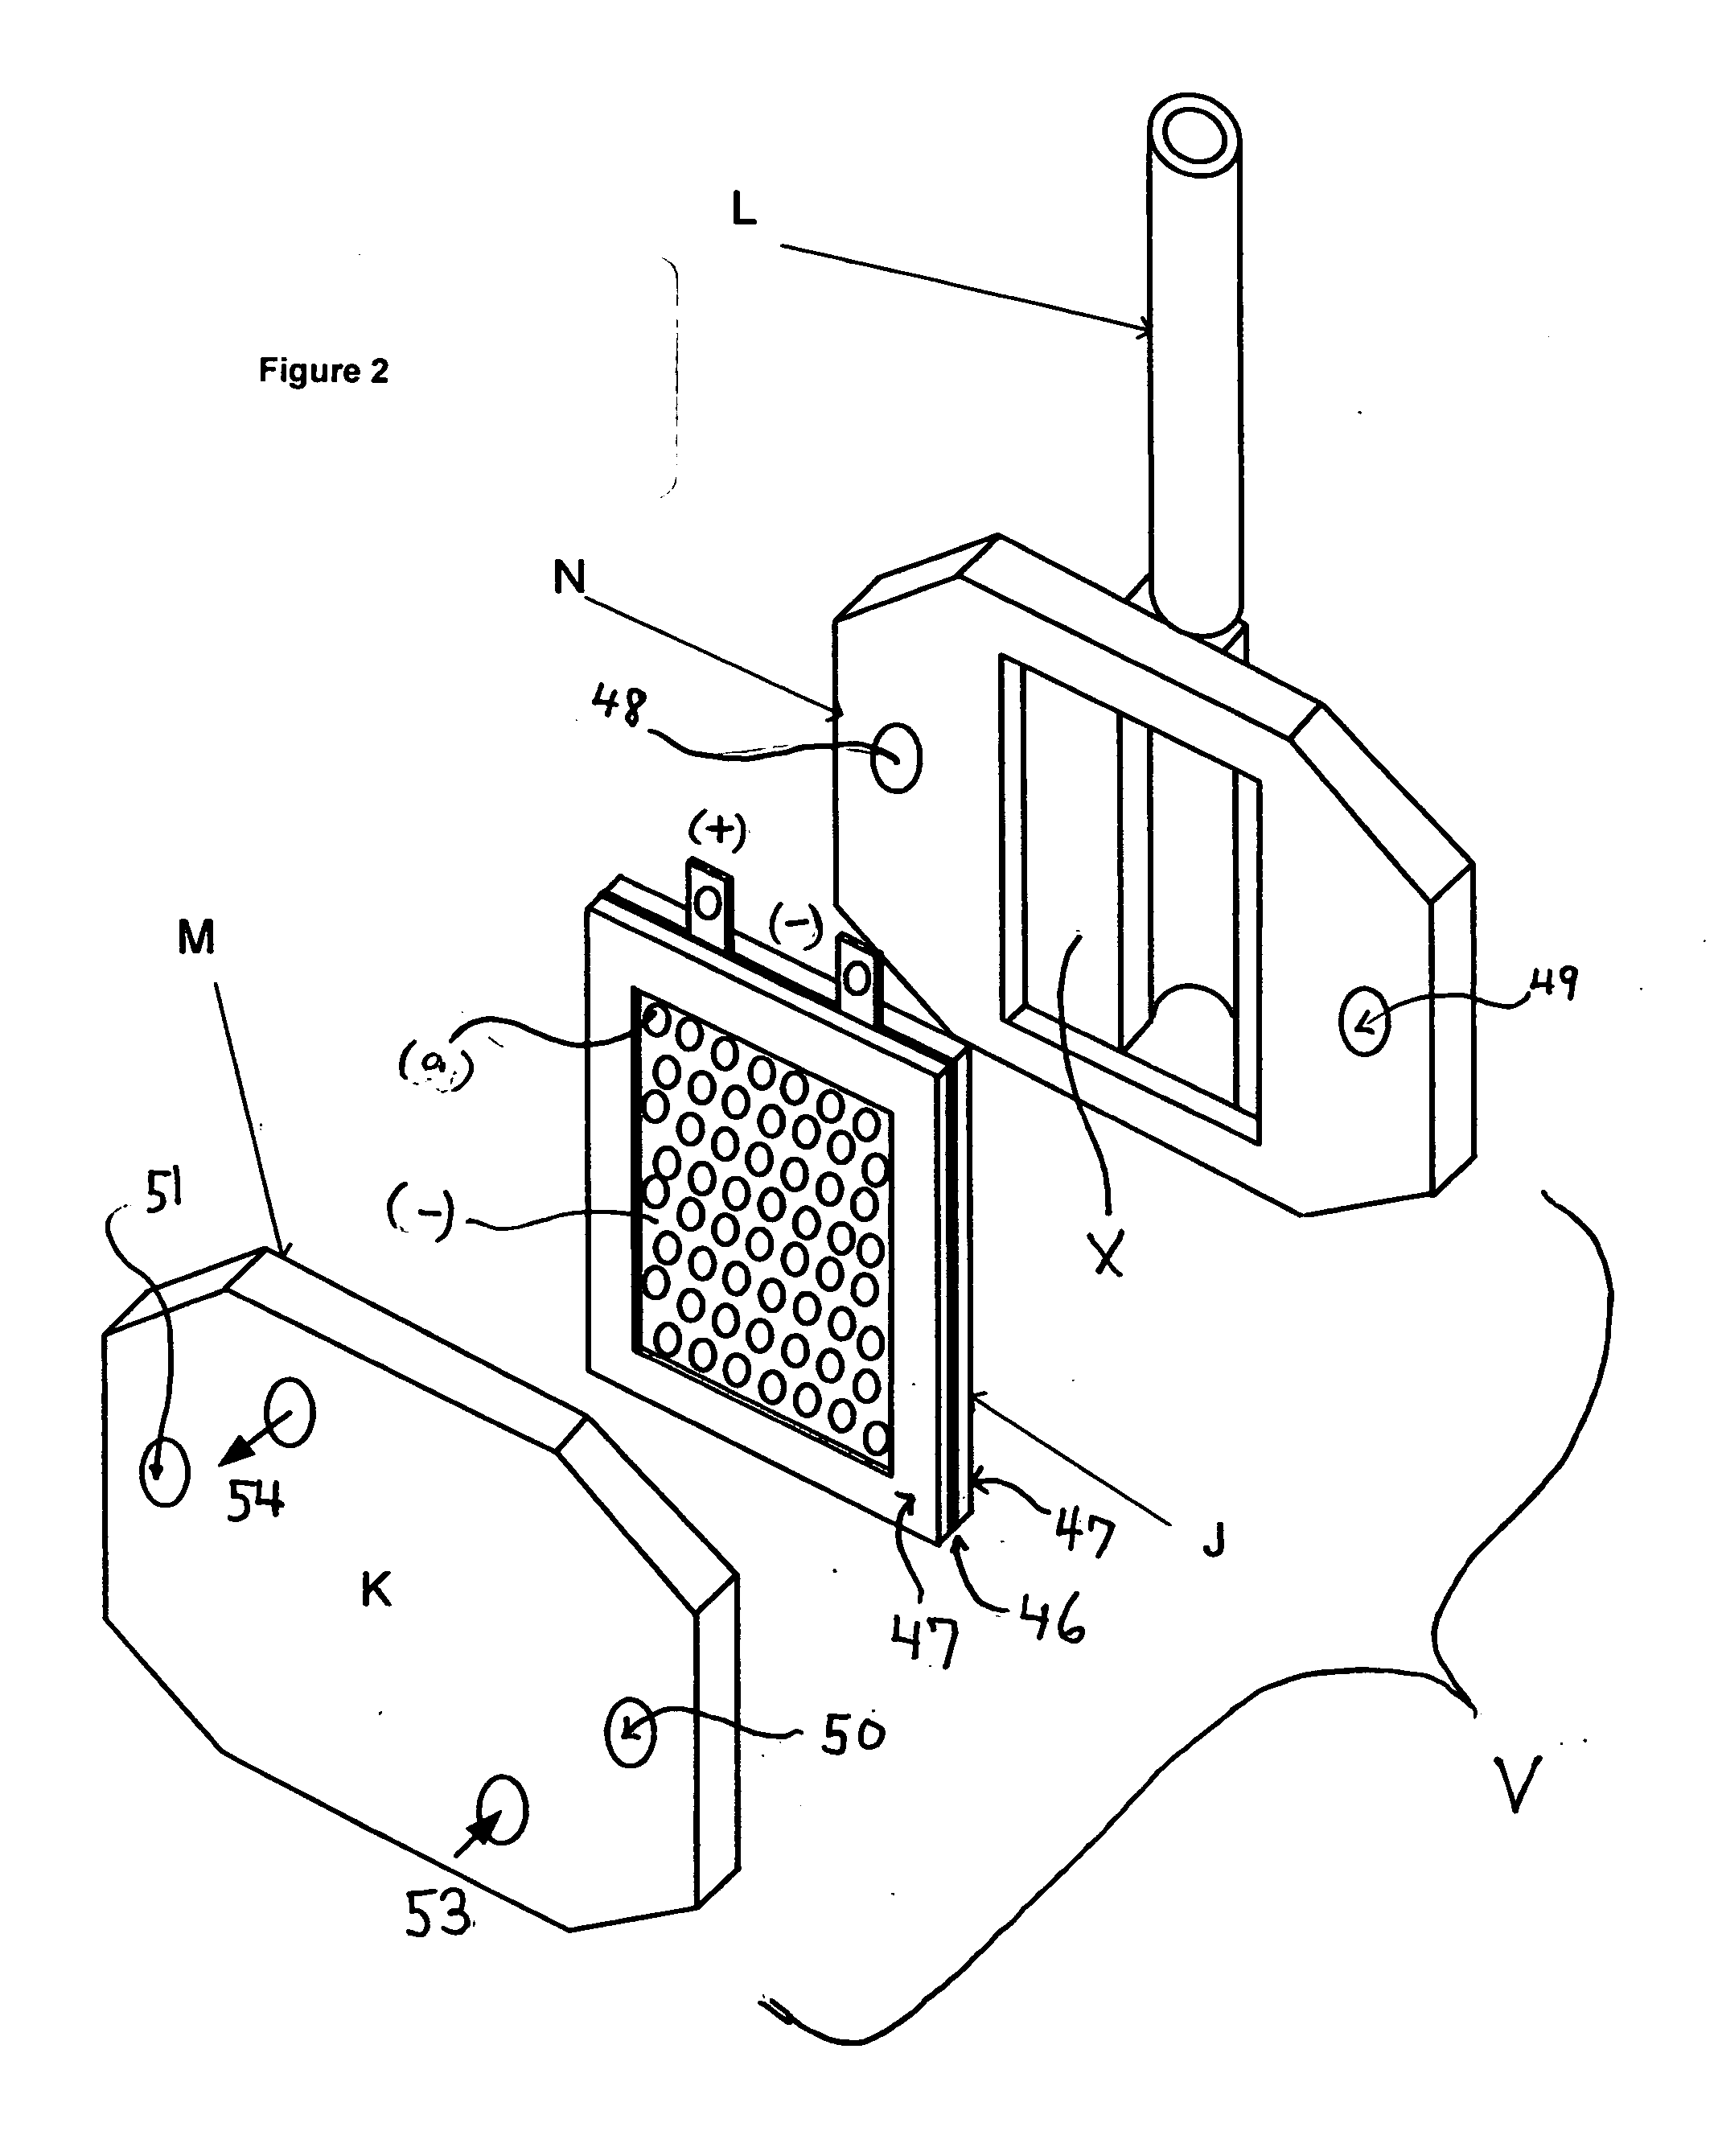 Acidic electrolyzed water production system and generation control method